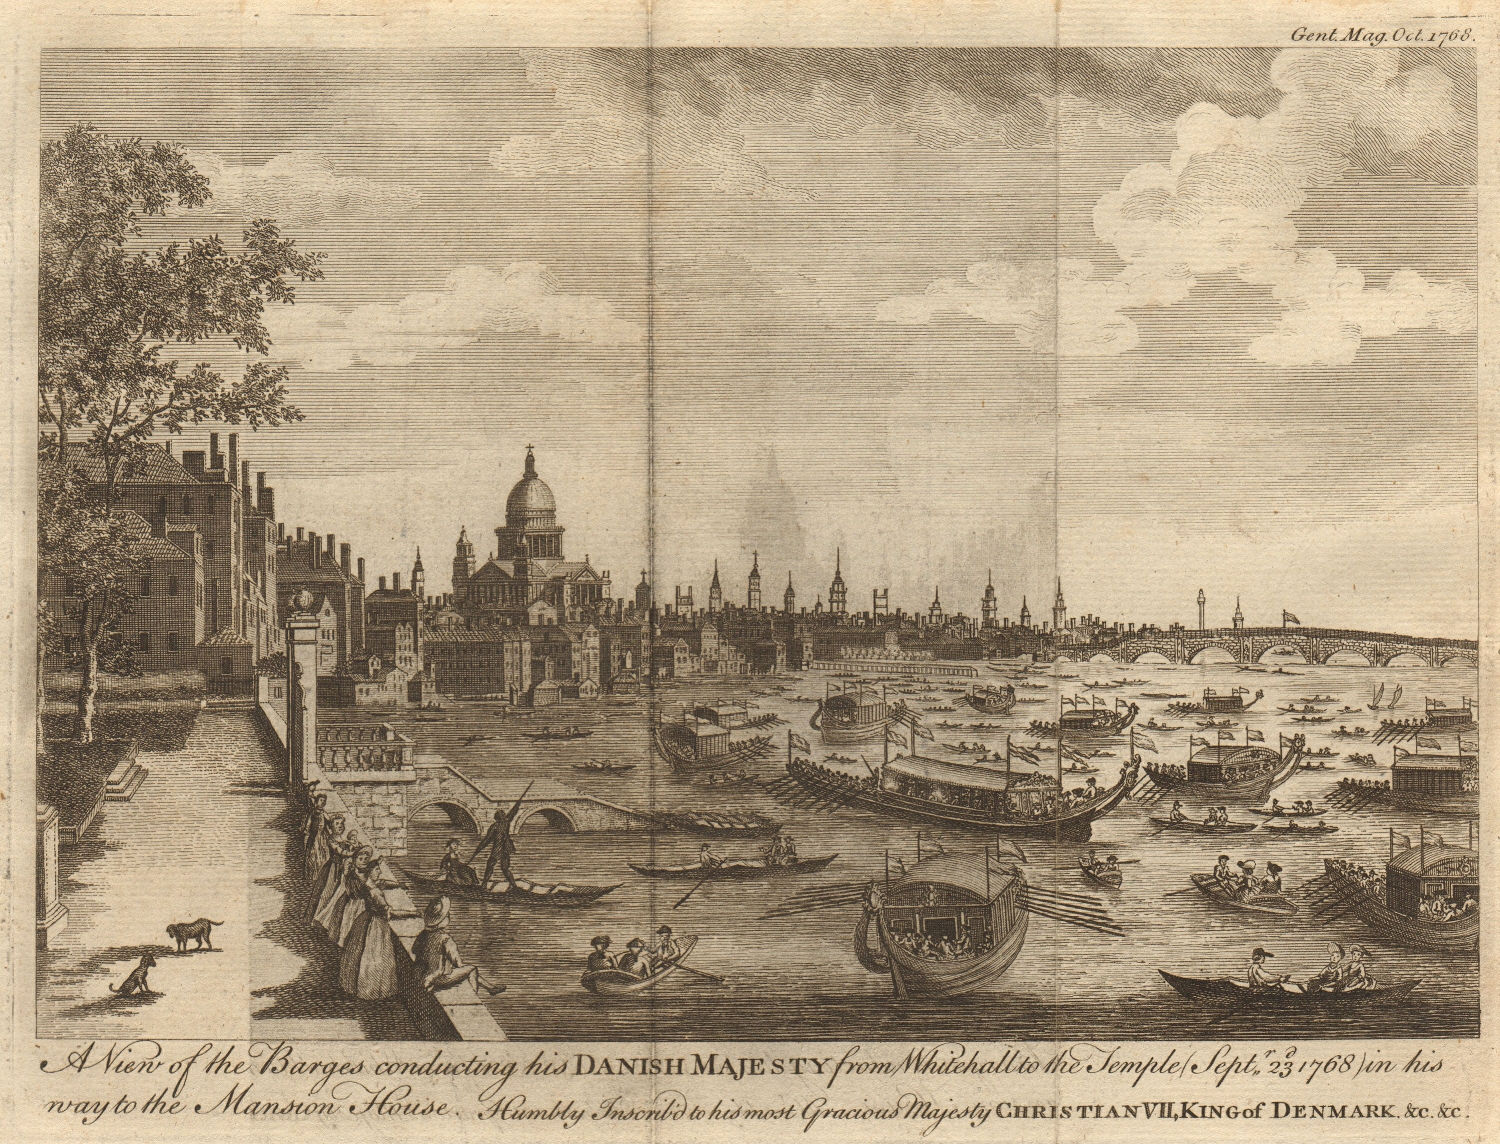 Associate Product London & St Paul's. State barges carrying King Christian VII of Denmark 1768